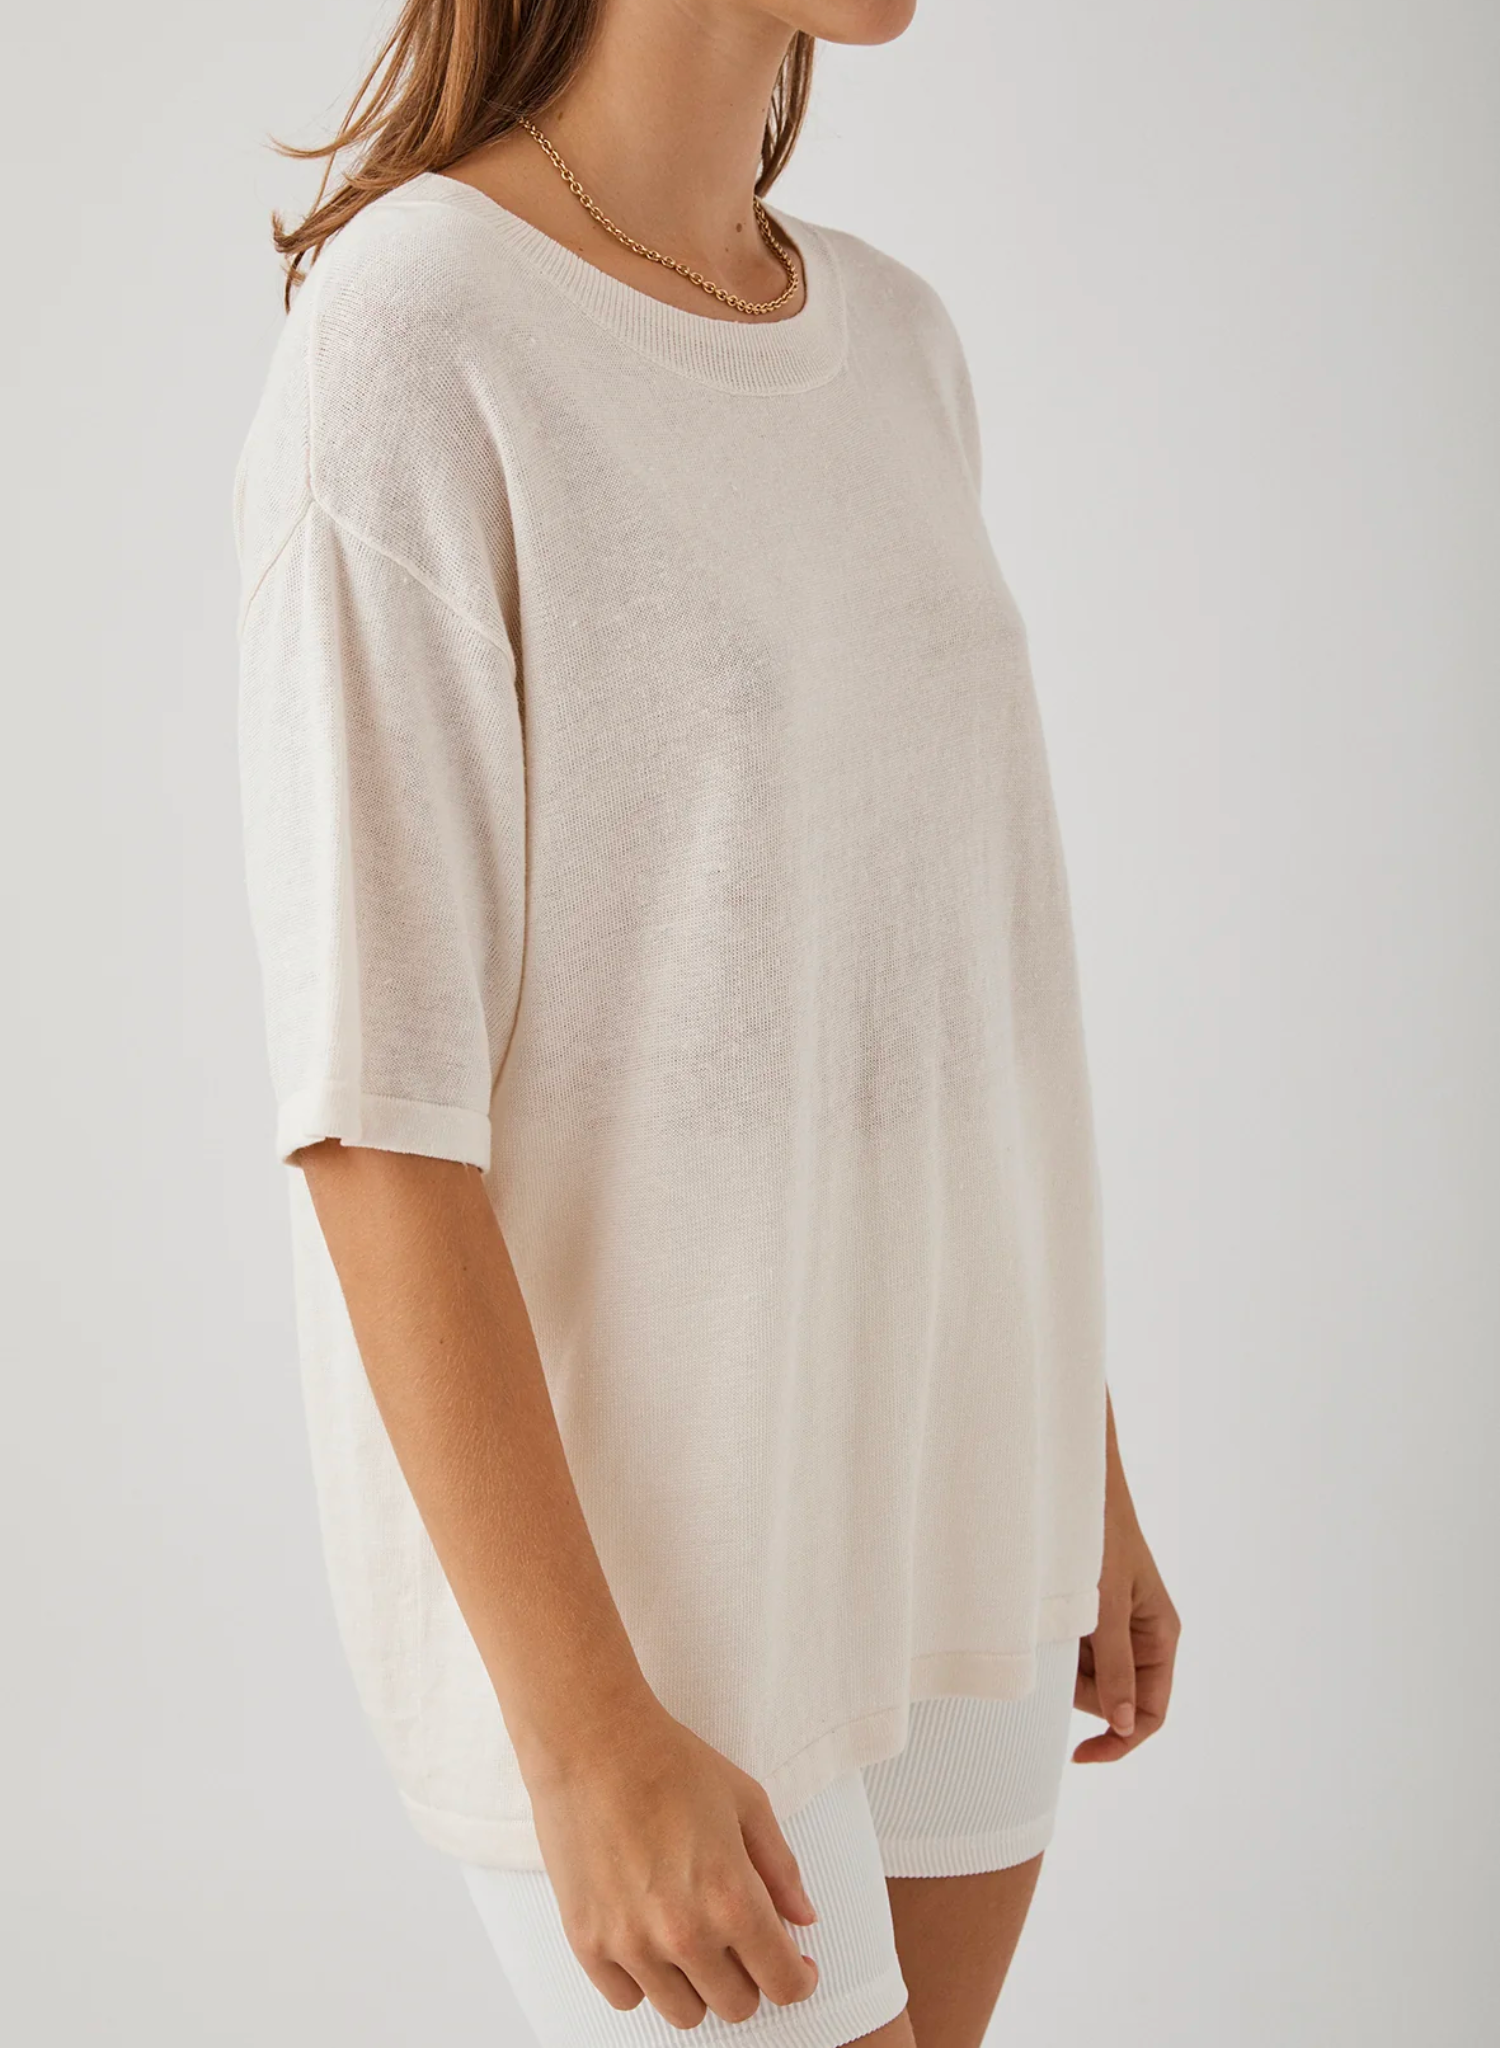 Hugo T-Shirt in Cream. 100% Linen knit. Oversized, classic tee shape. Wide crew neck Zero waste knit construction Soft hand feel Ethically produced Free of harmful chemicals: OEKO-TEX Standard 100